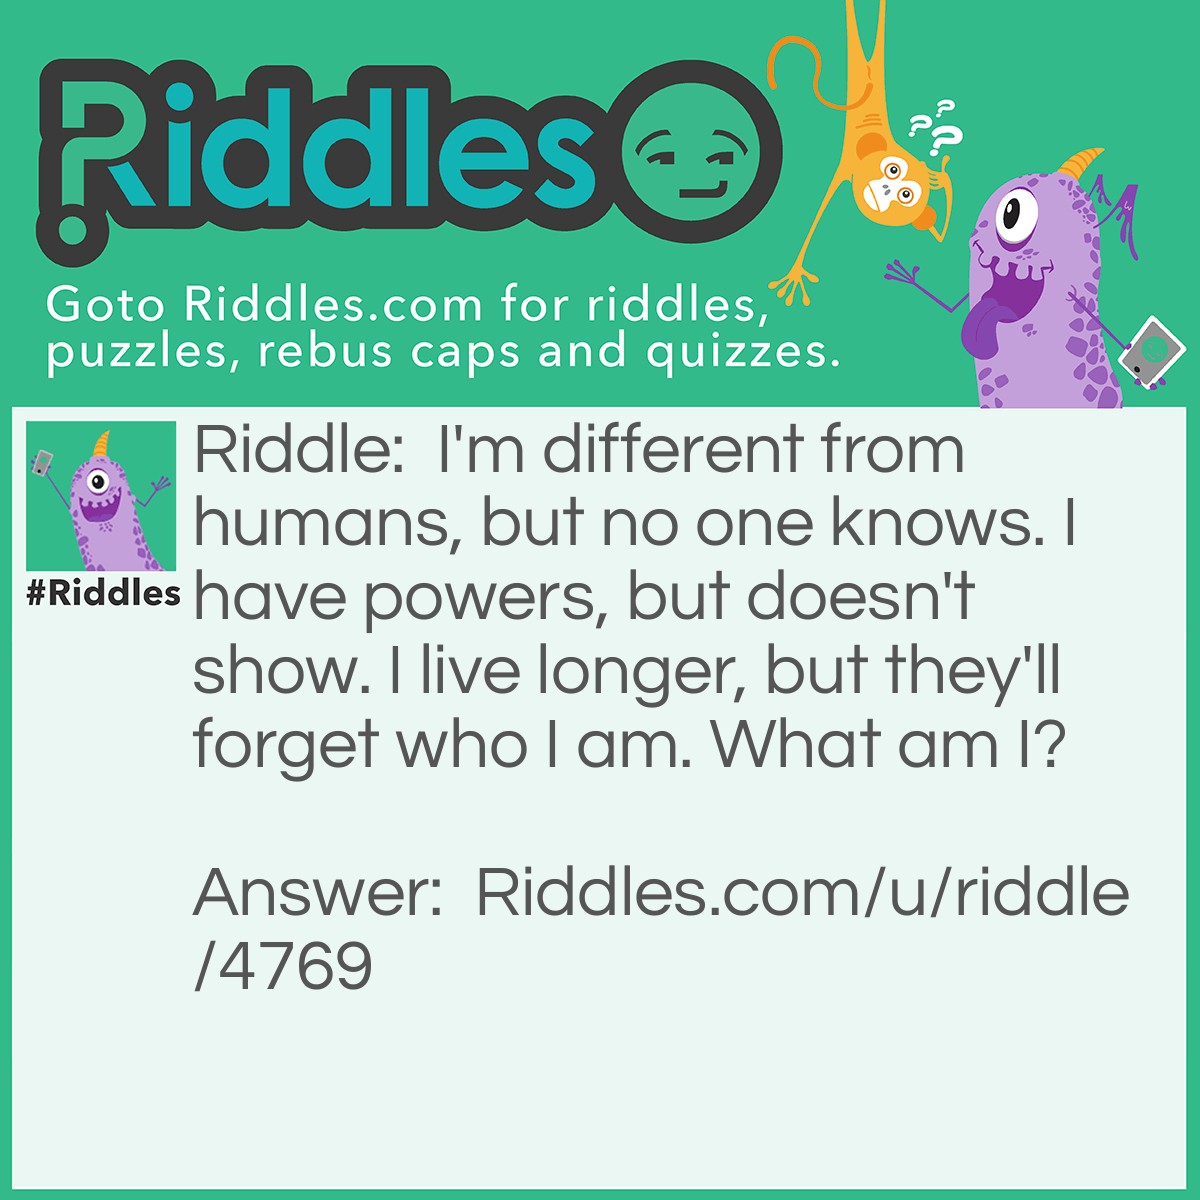 Riddle: I'm different from humans, but no one knows. I have powers, but doesn't show. I live longer, but they'll forget who I am. What am I? Answer: A demon.